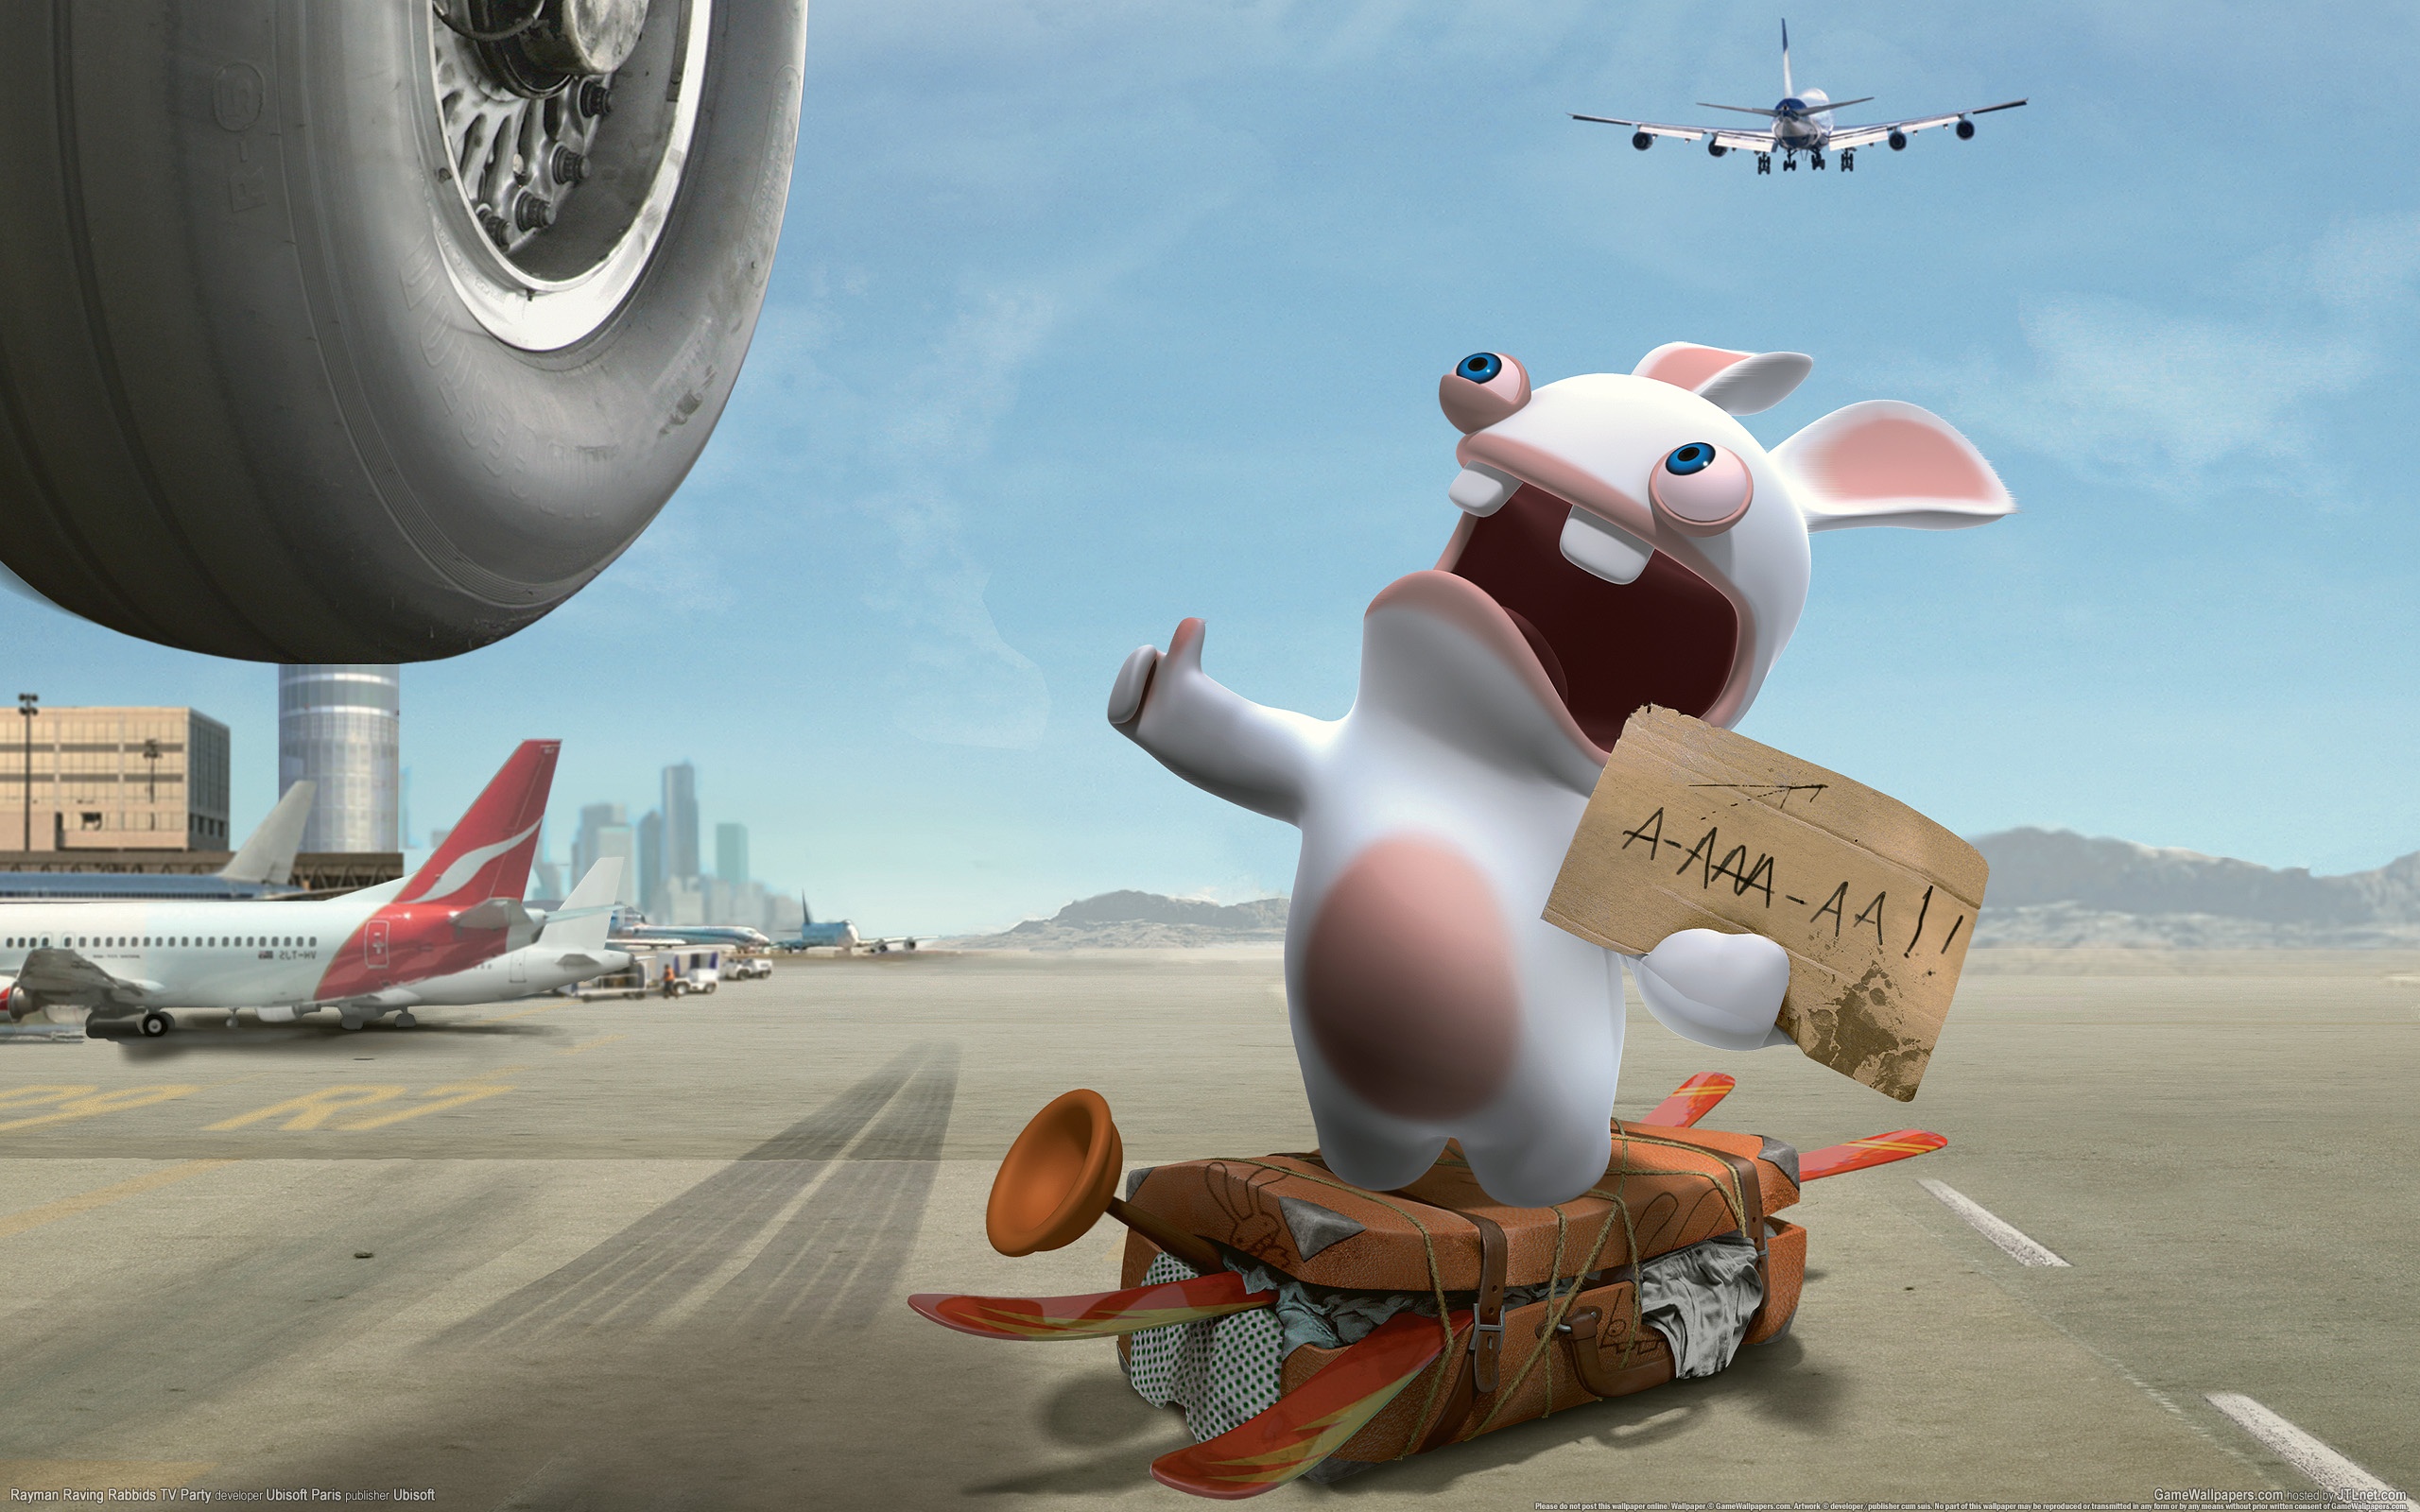 download raving rabbids tv party